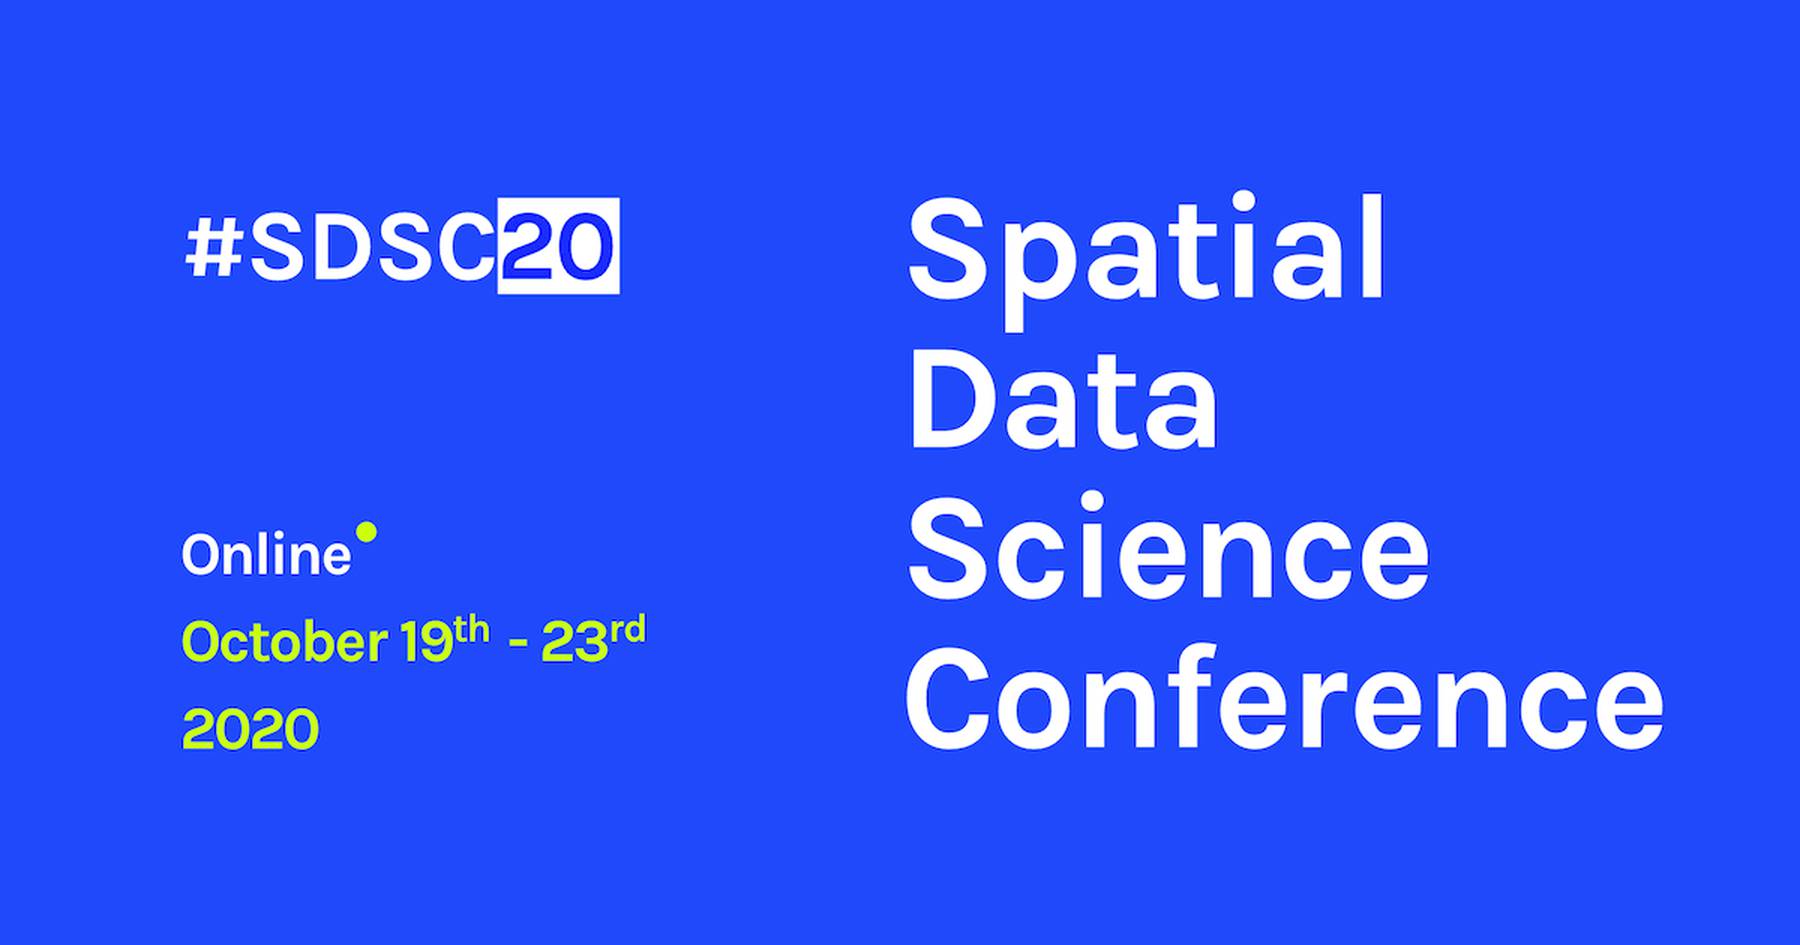 Spatial Data Science Conference 2020